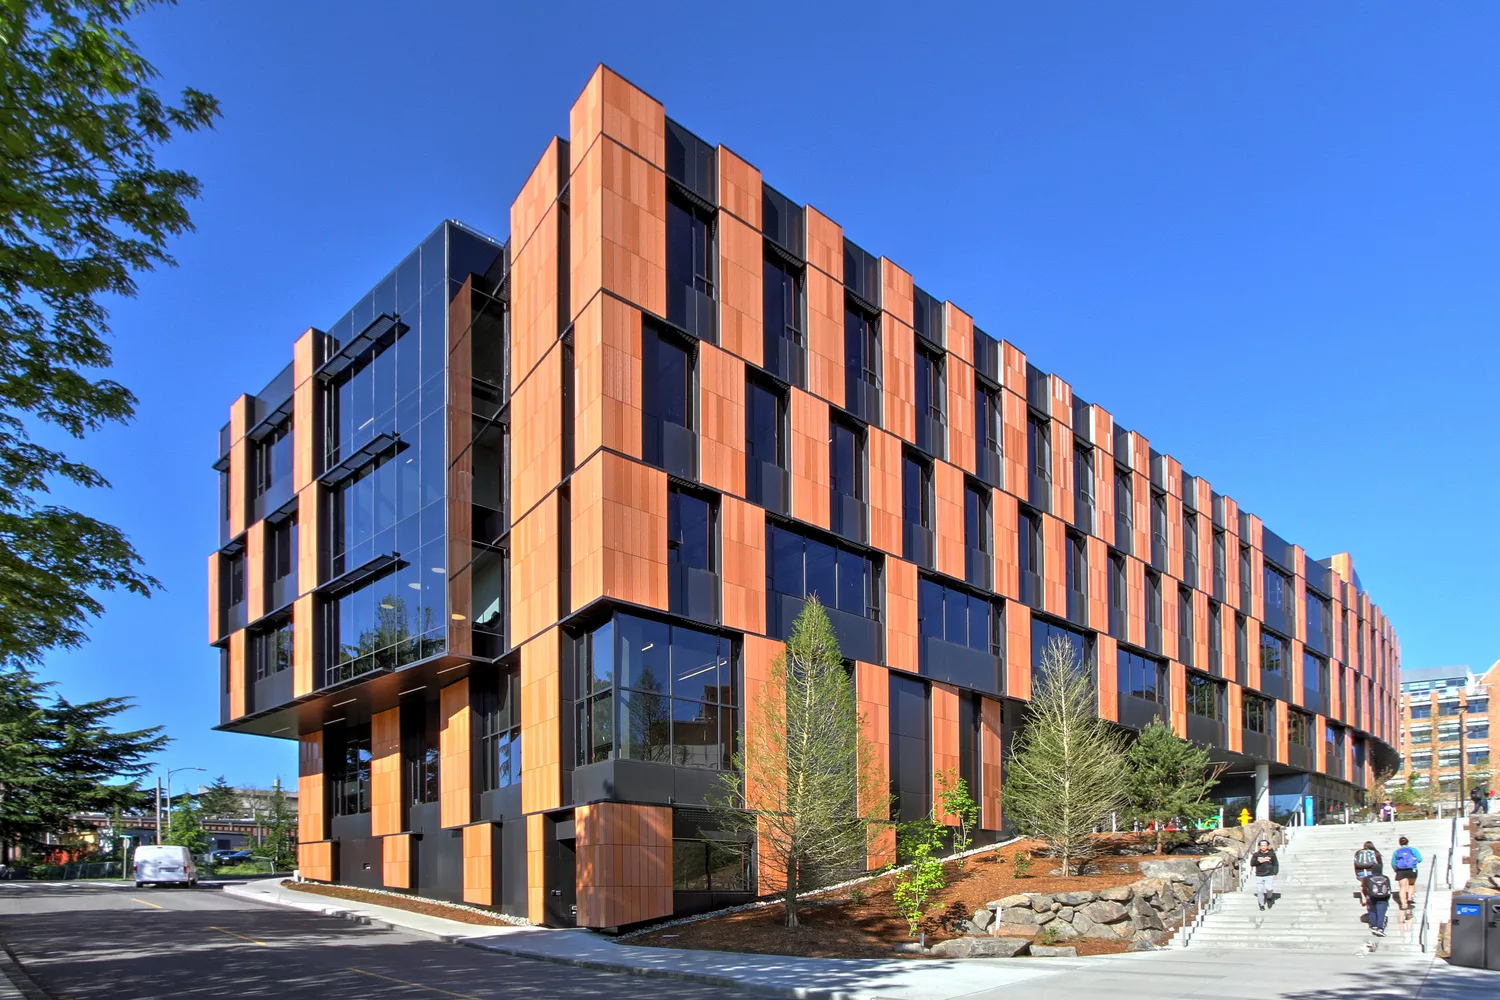 Exterior daylight view of the University of Washington's five-story Bill & Melinda Gates Center for Computer Science & Engineering with a glass-and-wood facade and surrounding roadway, staircase, and hillside landscaping